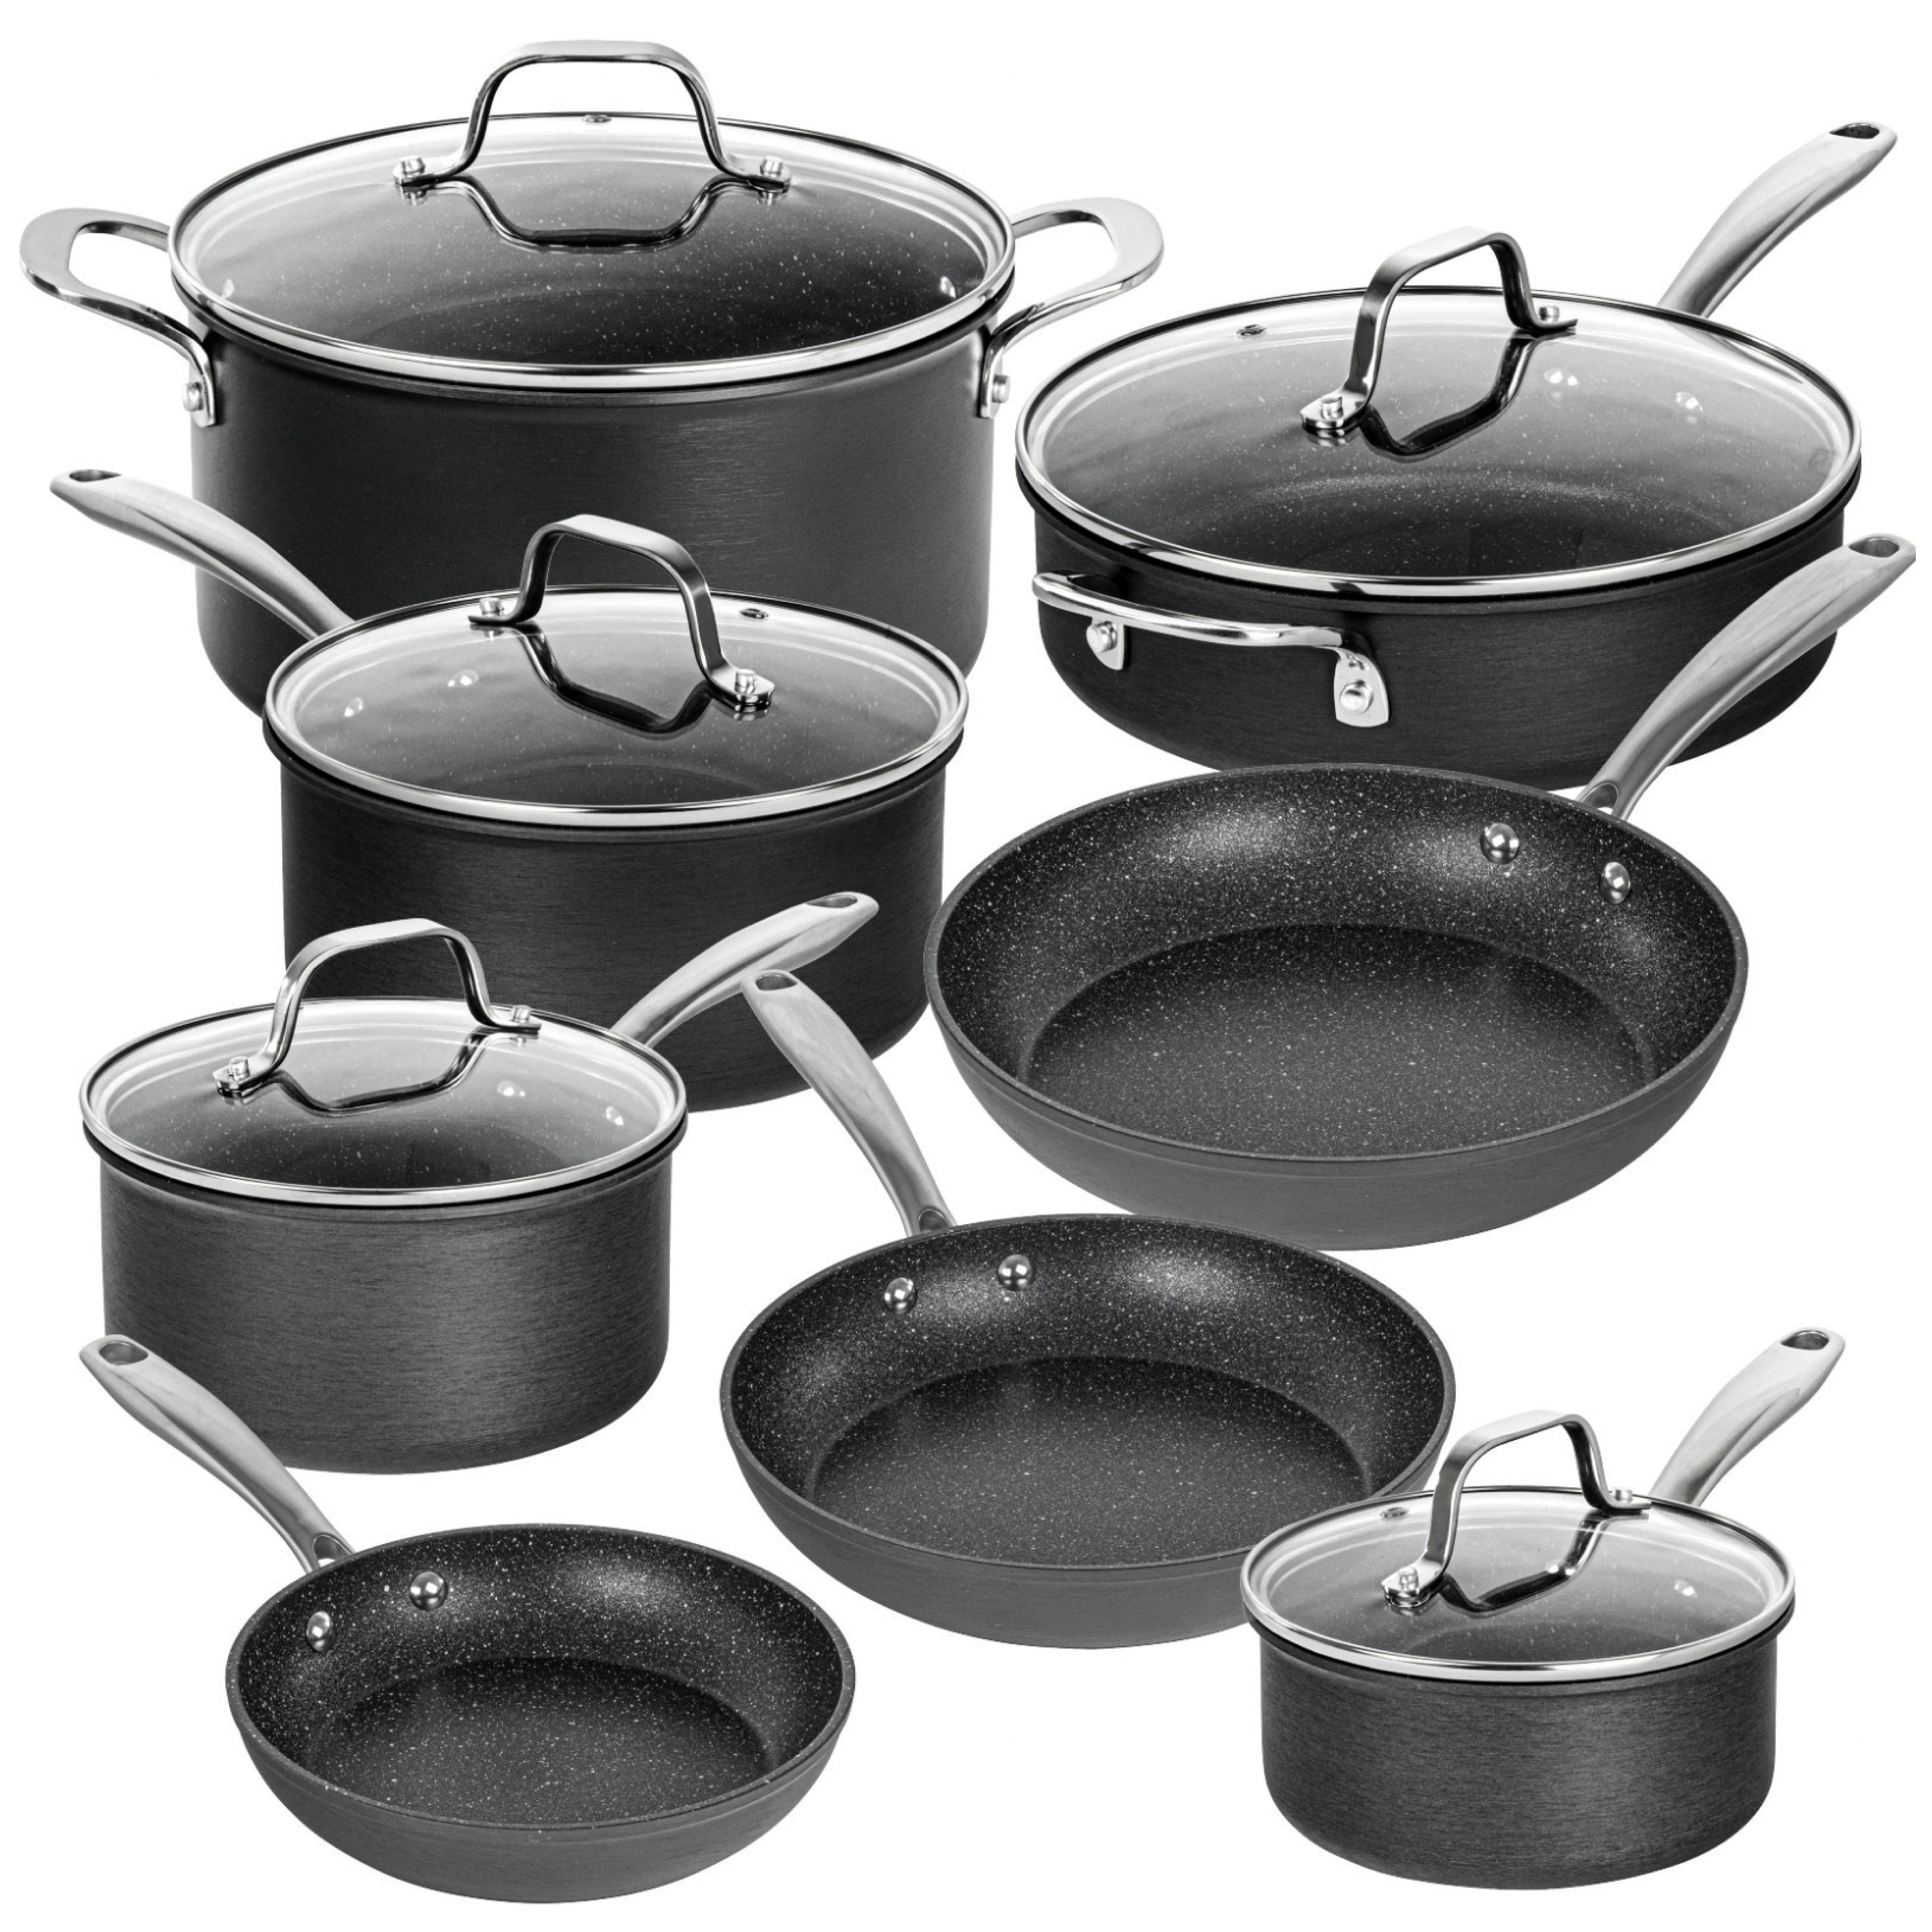 Nonstick Cookware Set Non Toxic 100% PFOA Free Compatible Induction Pots  and Pans Sets with Glass Lid 13 Piece - Marble Black